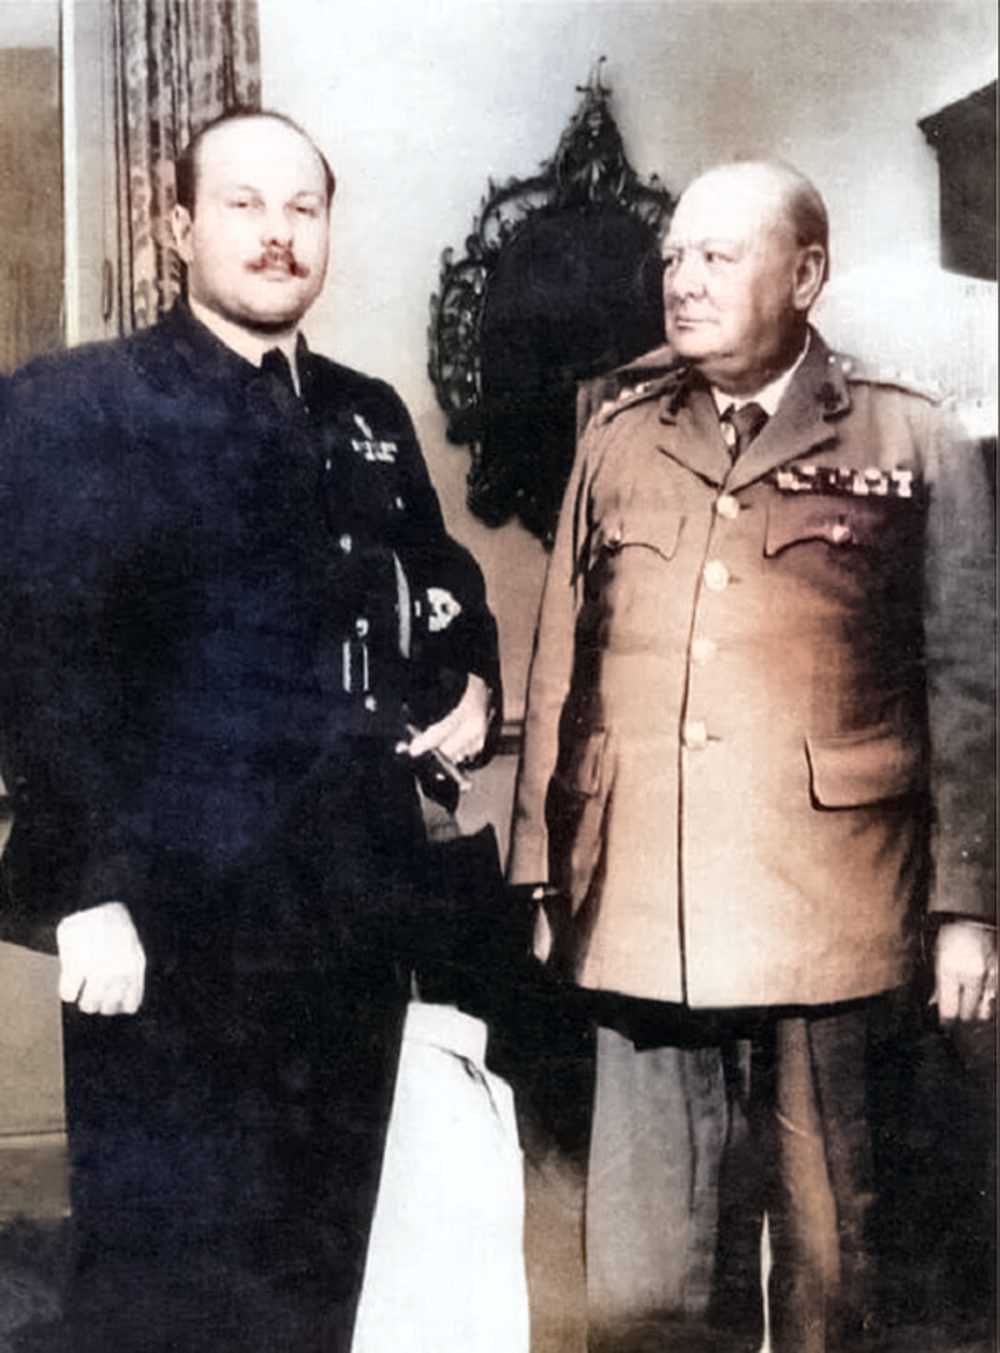 A photograph of two men in military uniforms standing next to each other. The first man is dressed in a blue military uniform and the second man is dressed in a beige military uniform with medal ribbons on his chest.